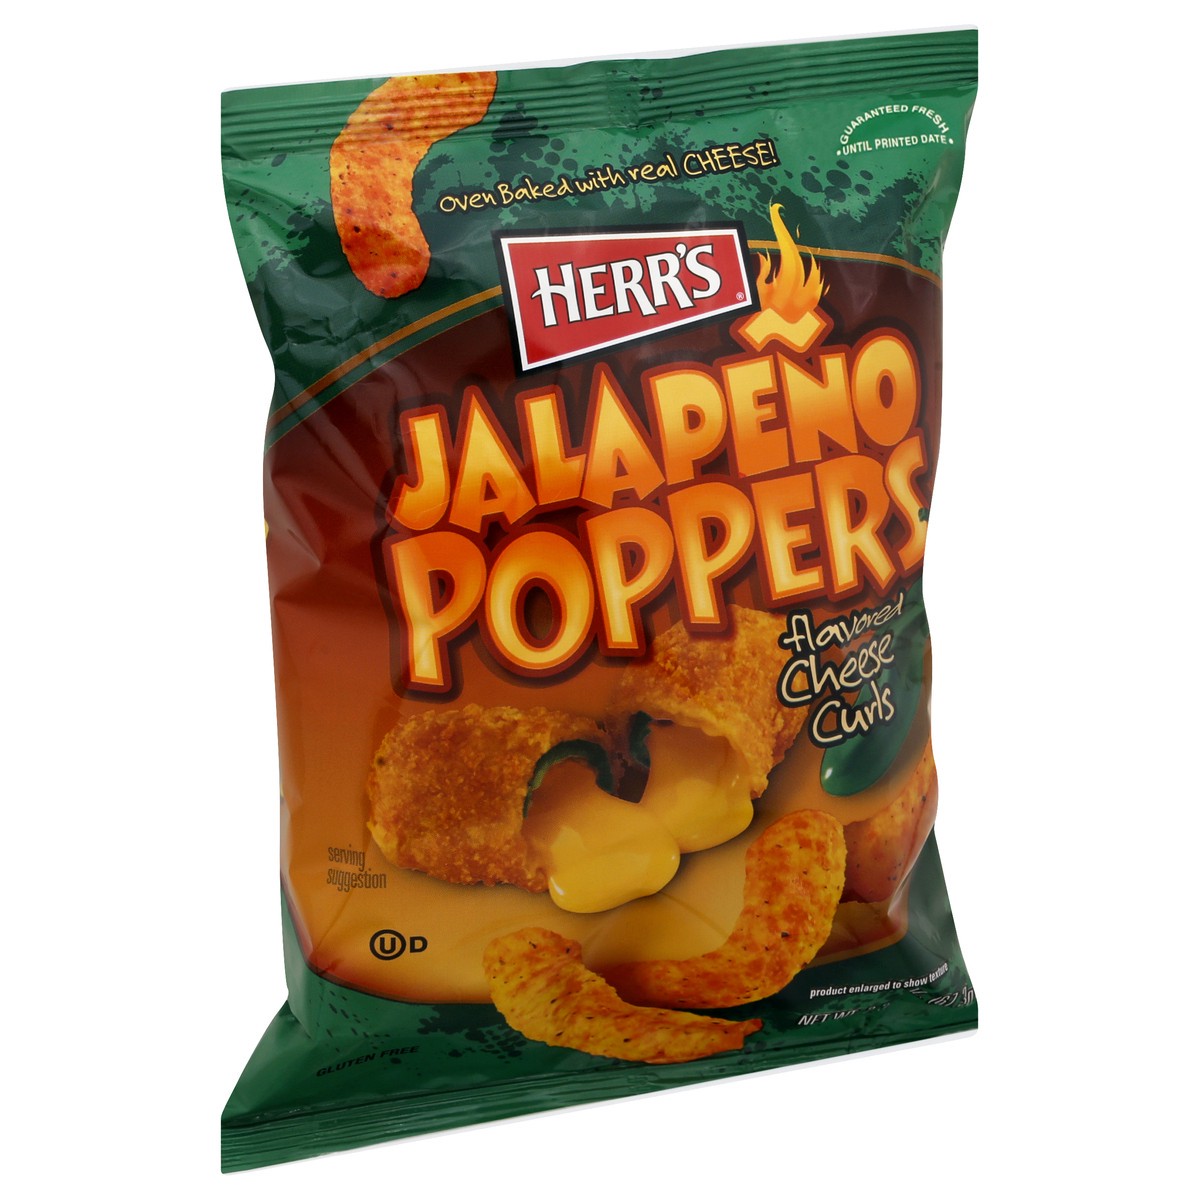 slide 5 of 11, Herr's Jalapeno Poppers Flavored Cheese Curls 2.375 oz, 2.375 oz